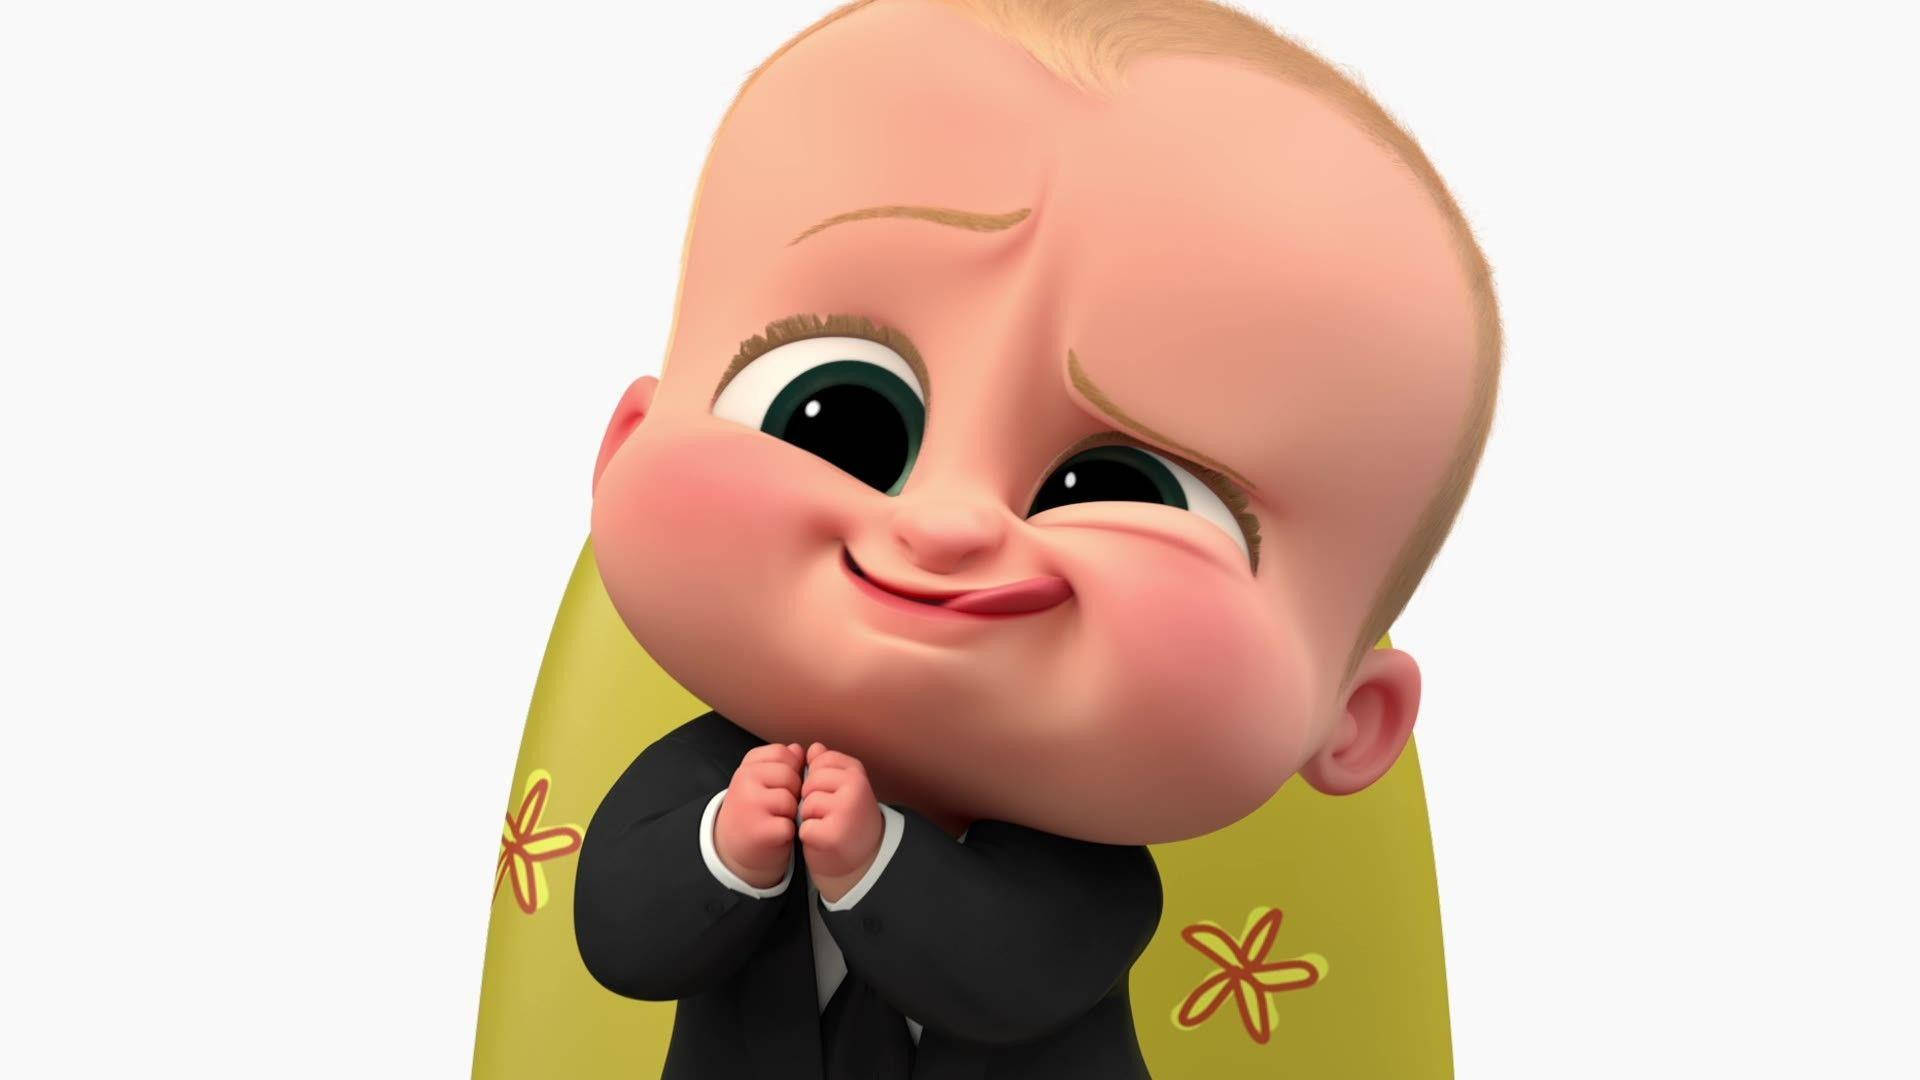 100+] The Boss Baby Pictures